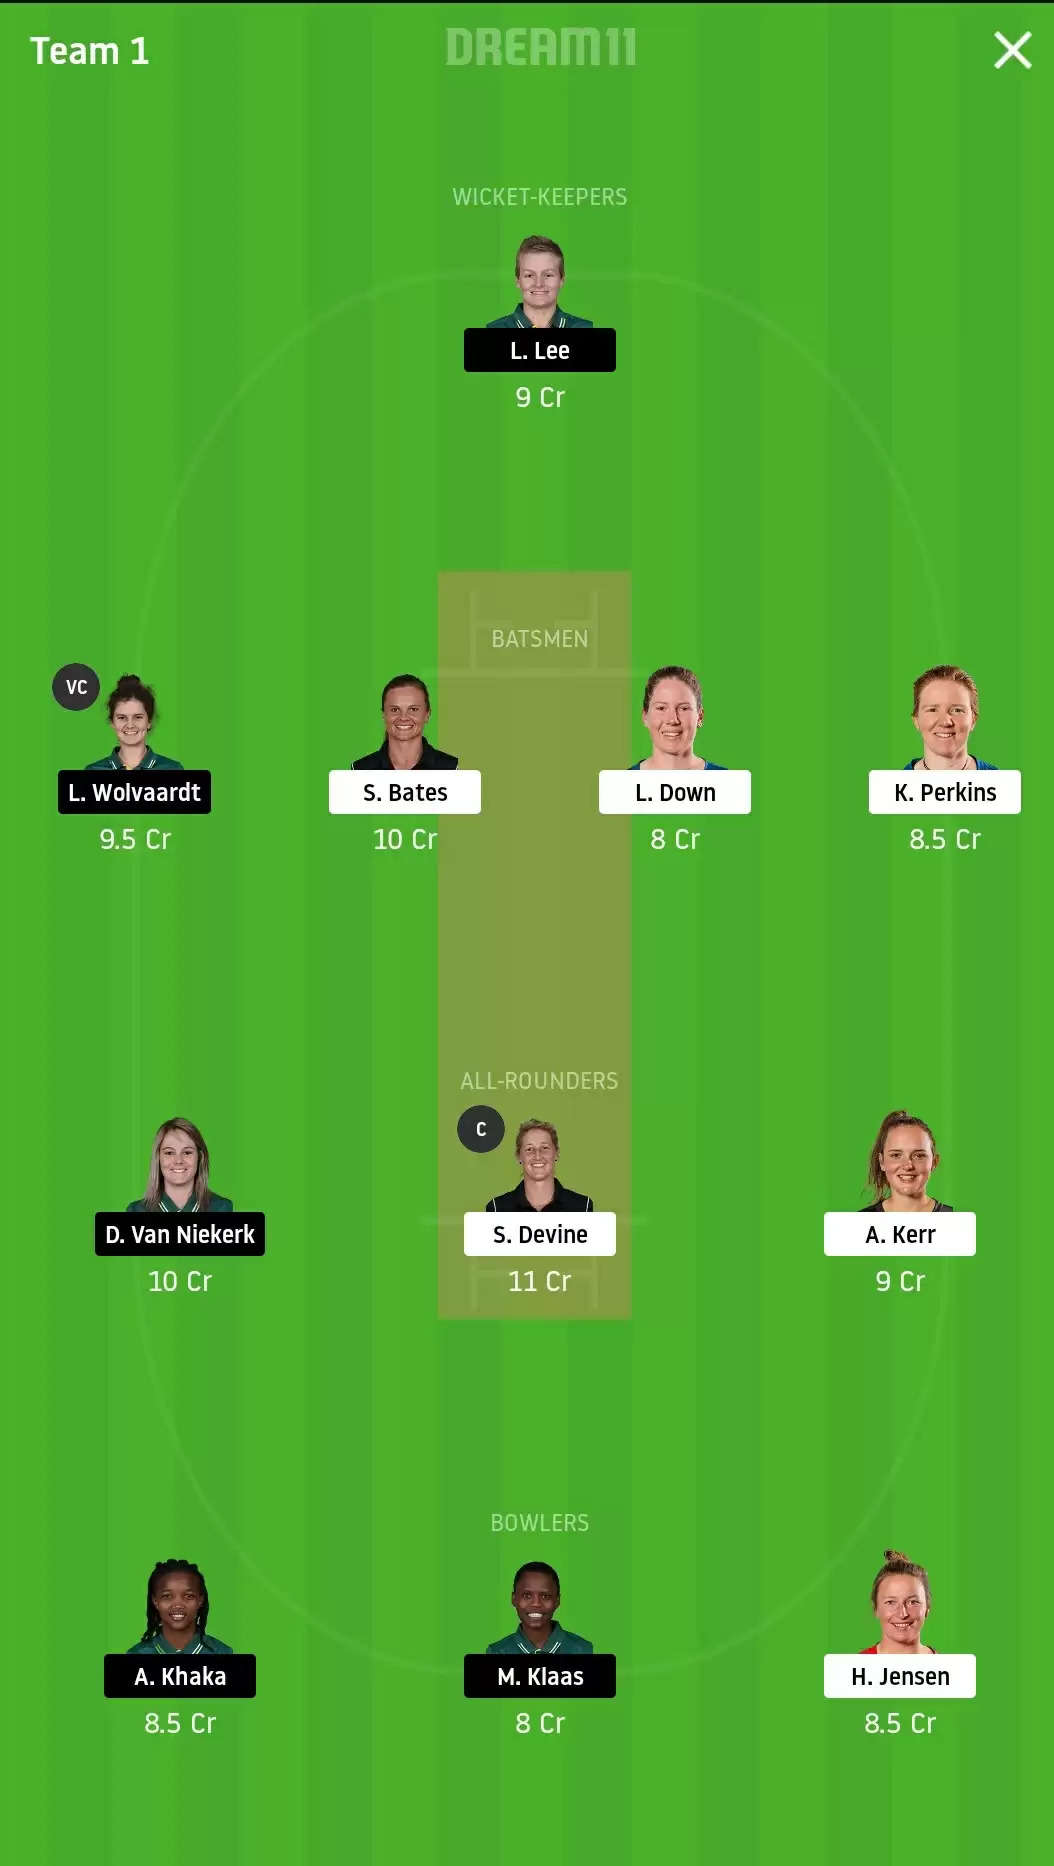 NZ-W vs SA-W Dream11 Fantasy Cricket Prediction | 2nd ODI: New Zealand Women vs South Africa Women | Dream 11 Team, Preview, Probable Playing XI, Pitch Report and Weather Conditions